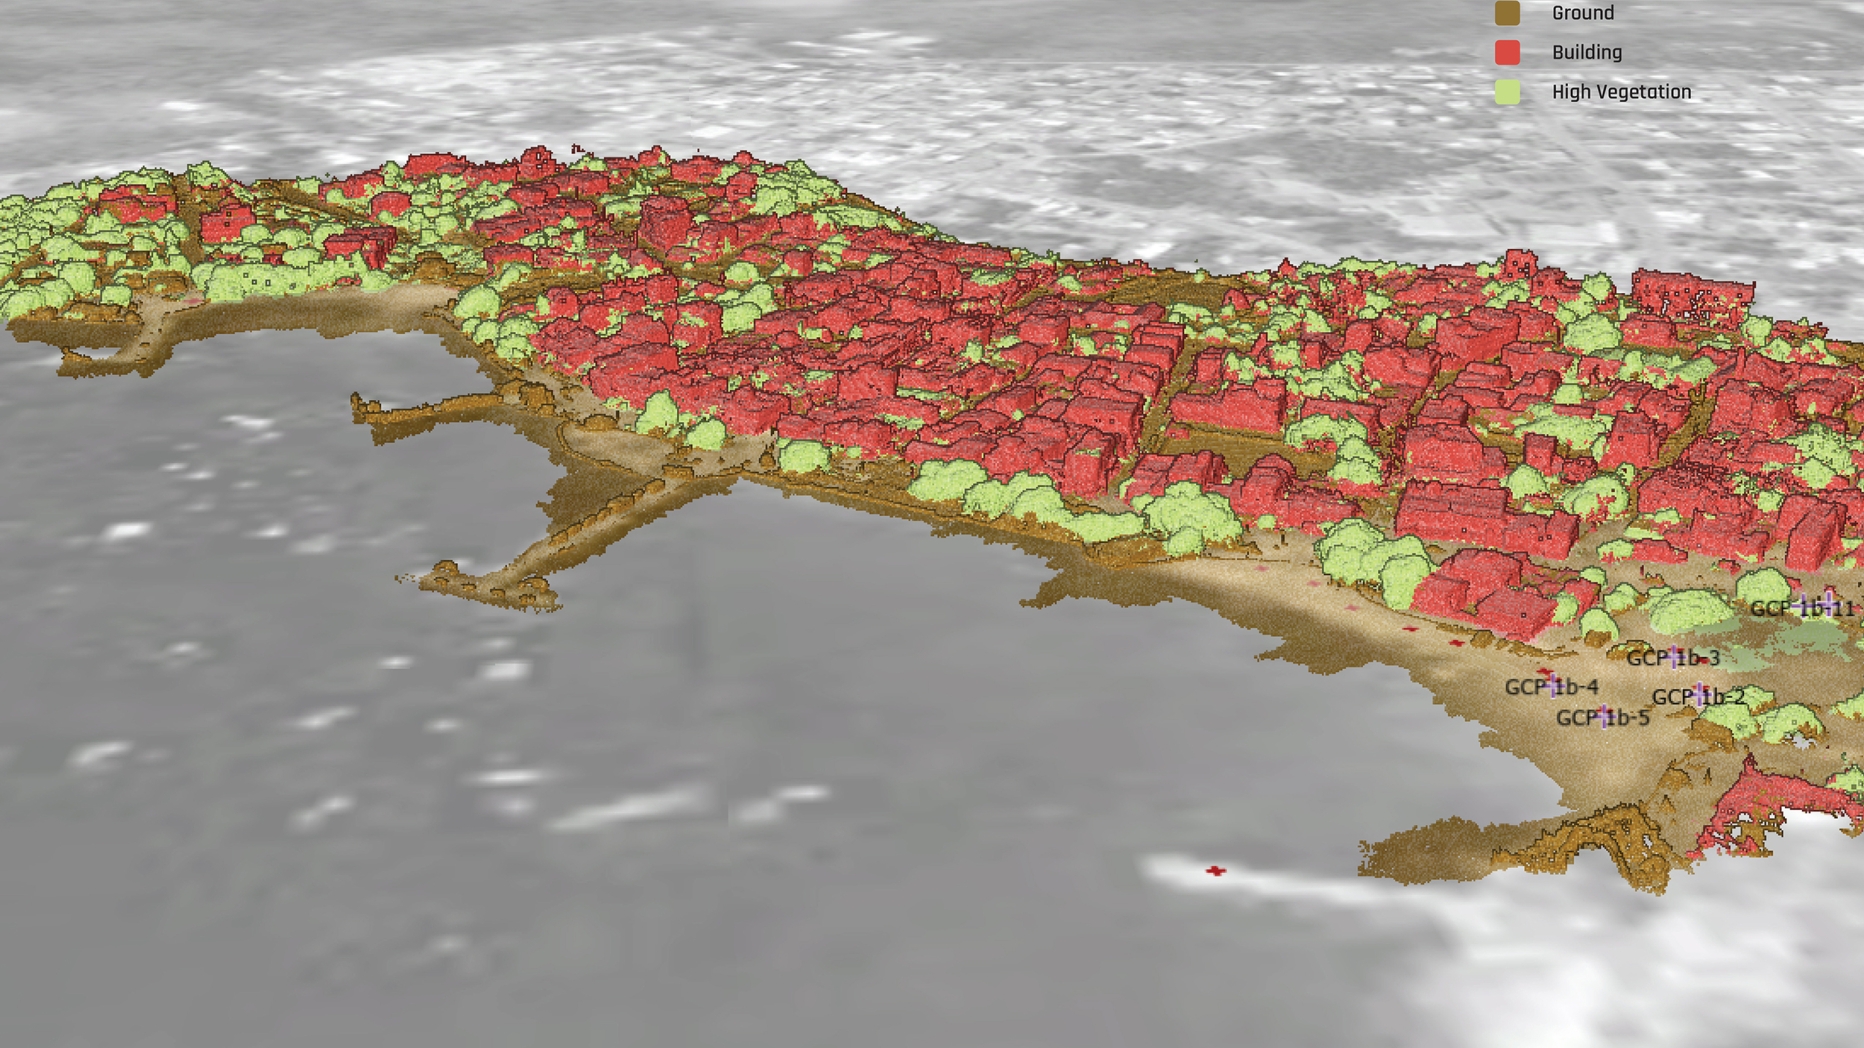 Same computer model but showing houses in red and vegetation in green